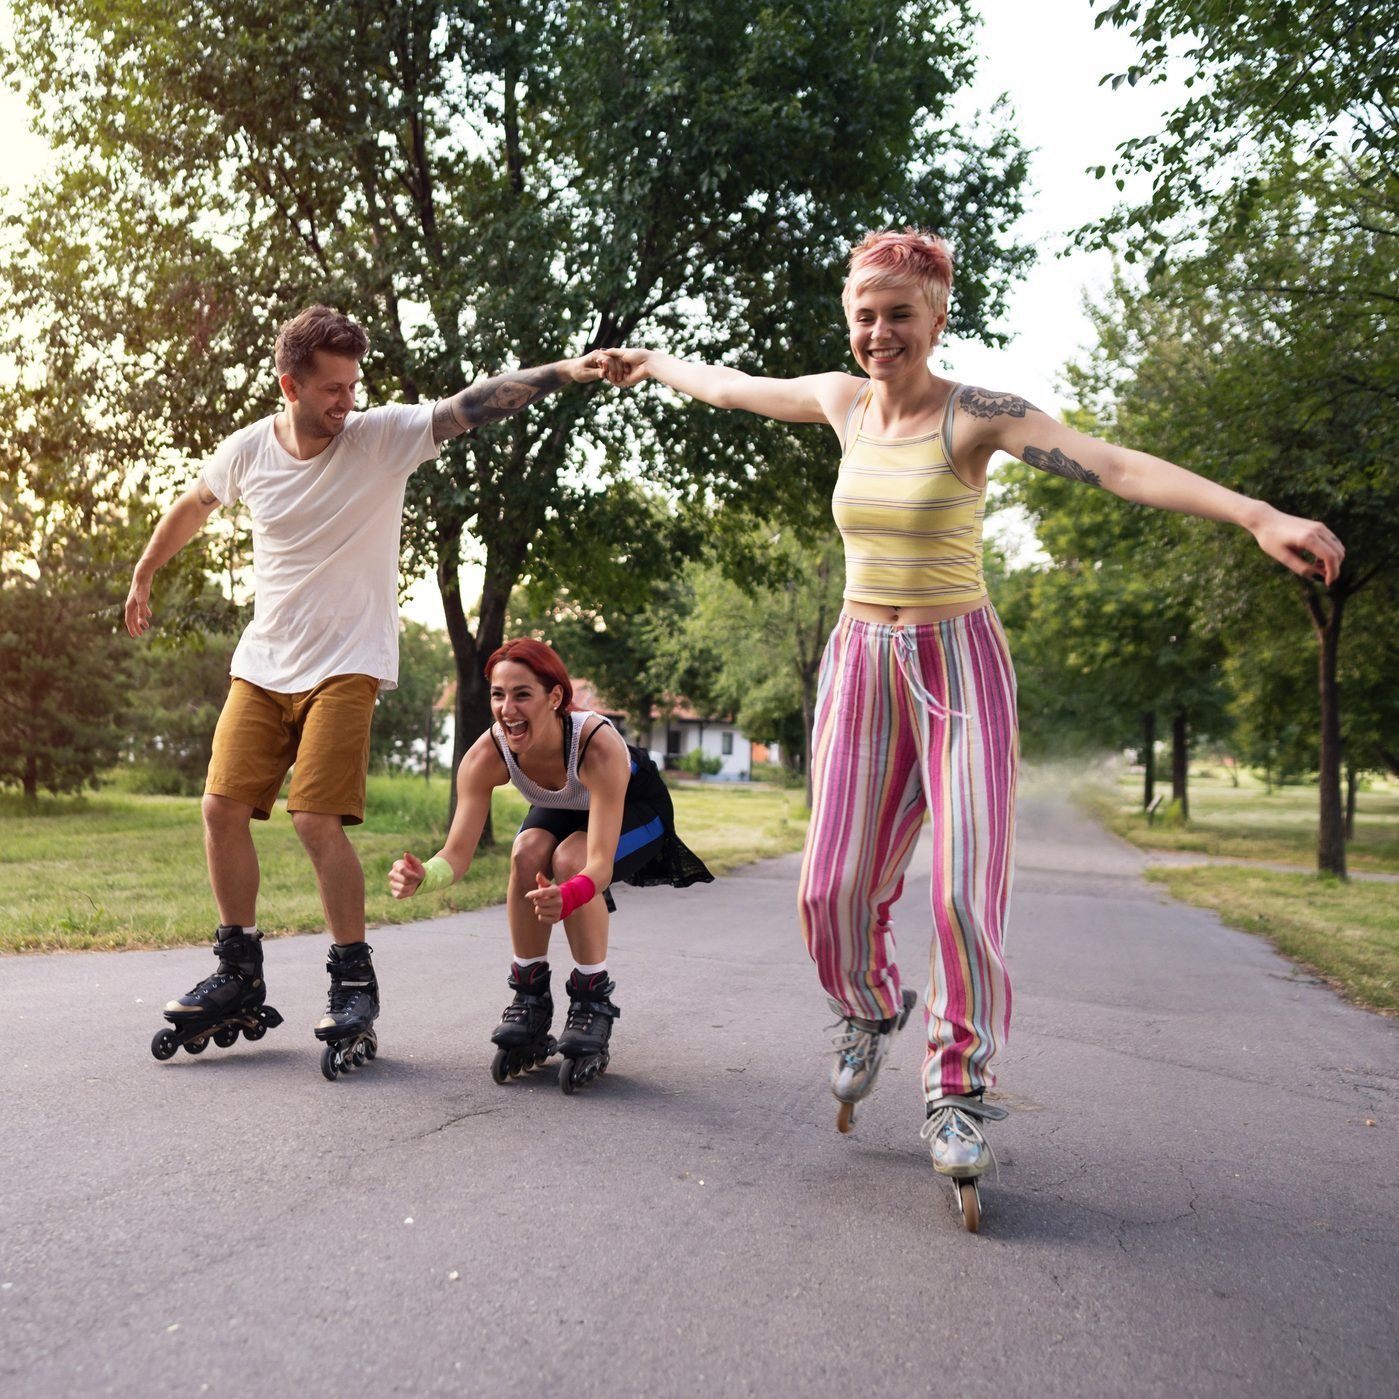 Smiling friends having fun roller skating in the park